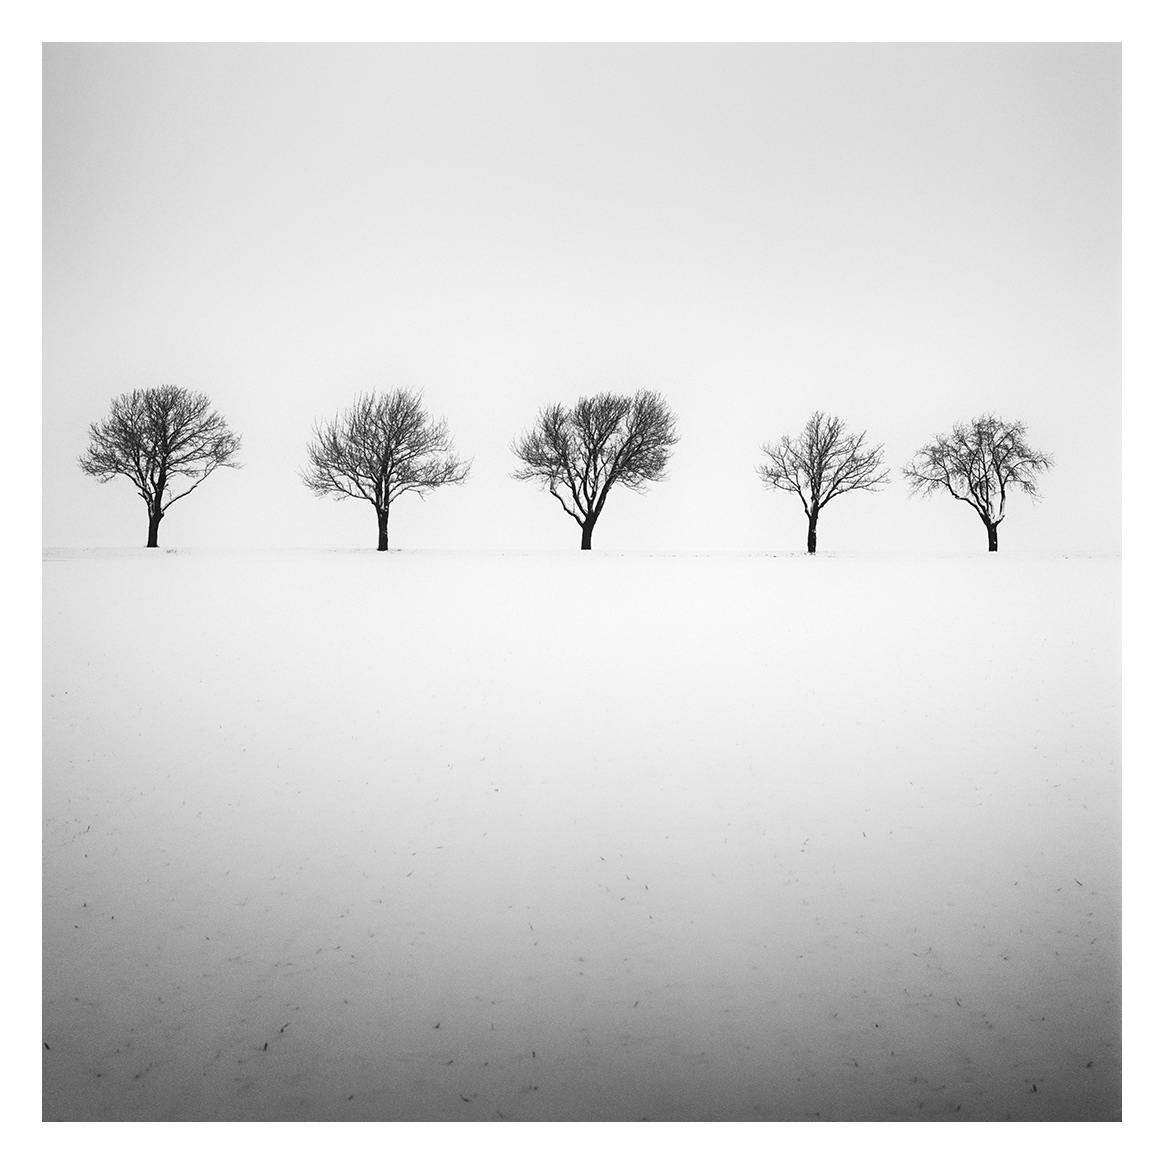 Gerald Berghammer | Black and White Photography – Five Trees in snowy Field winter avenue Austria